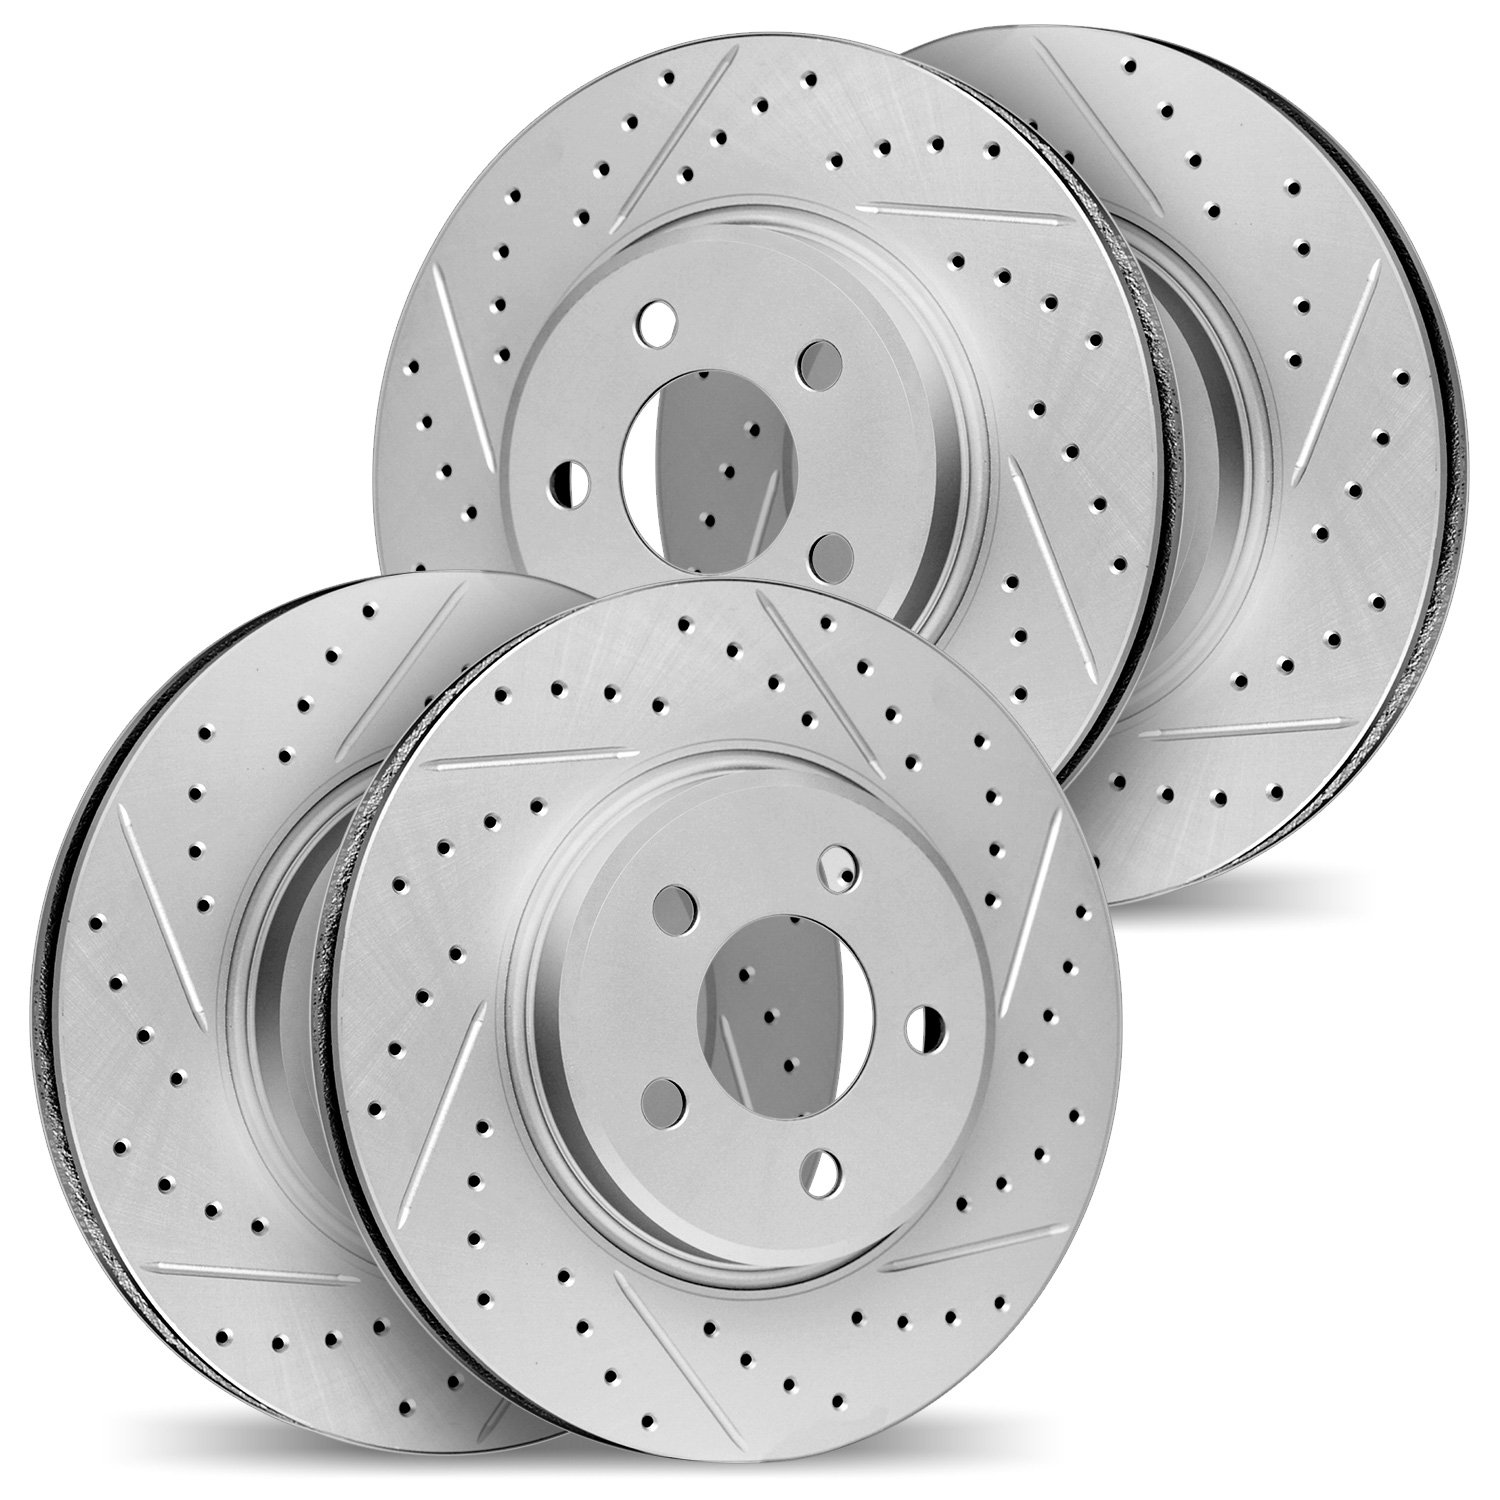 2004-31064 Geoperformance Drilled/Slotted Brake Rotors, 2004-2006 BMW, Position: Front and Rear